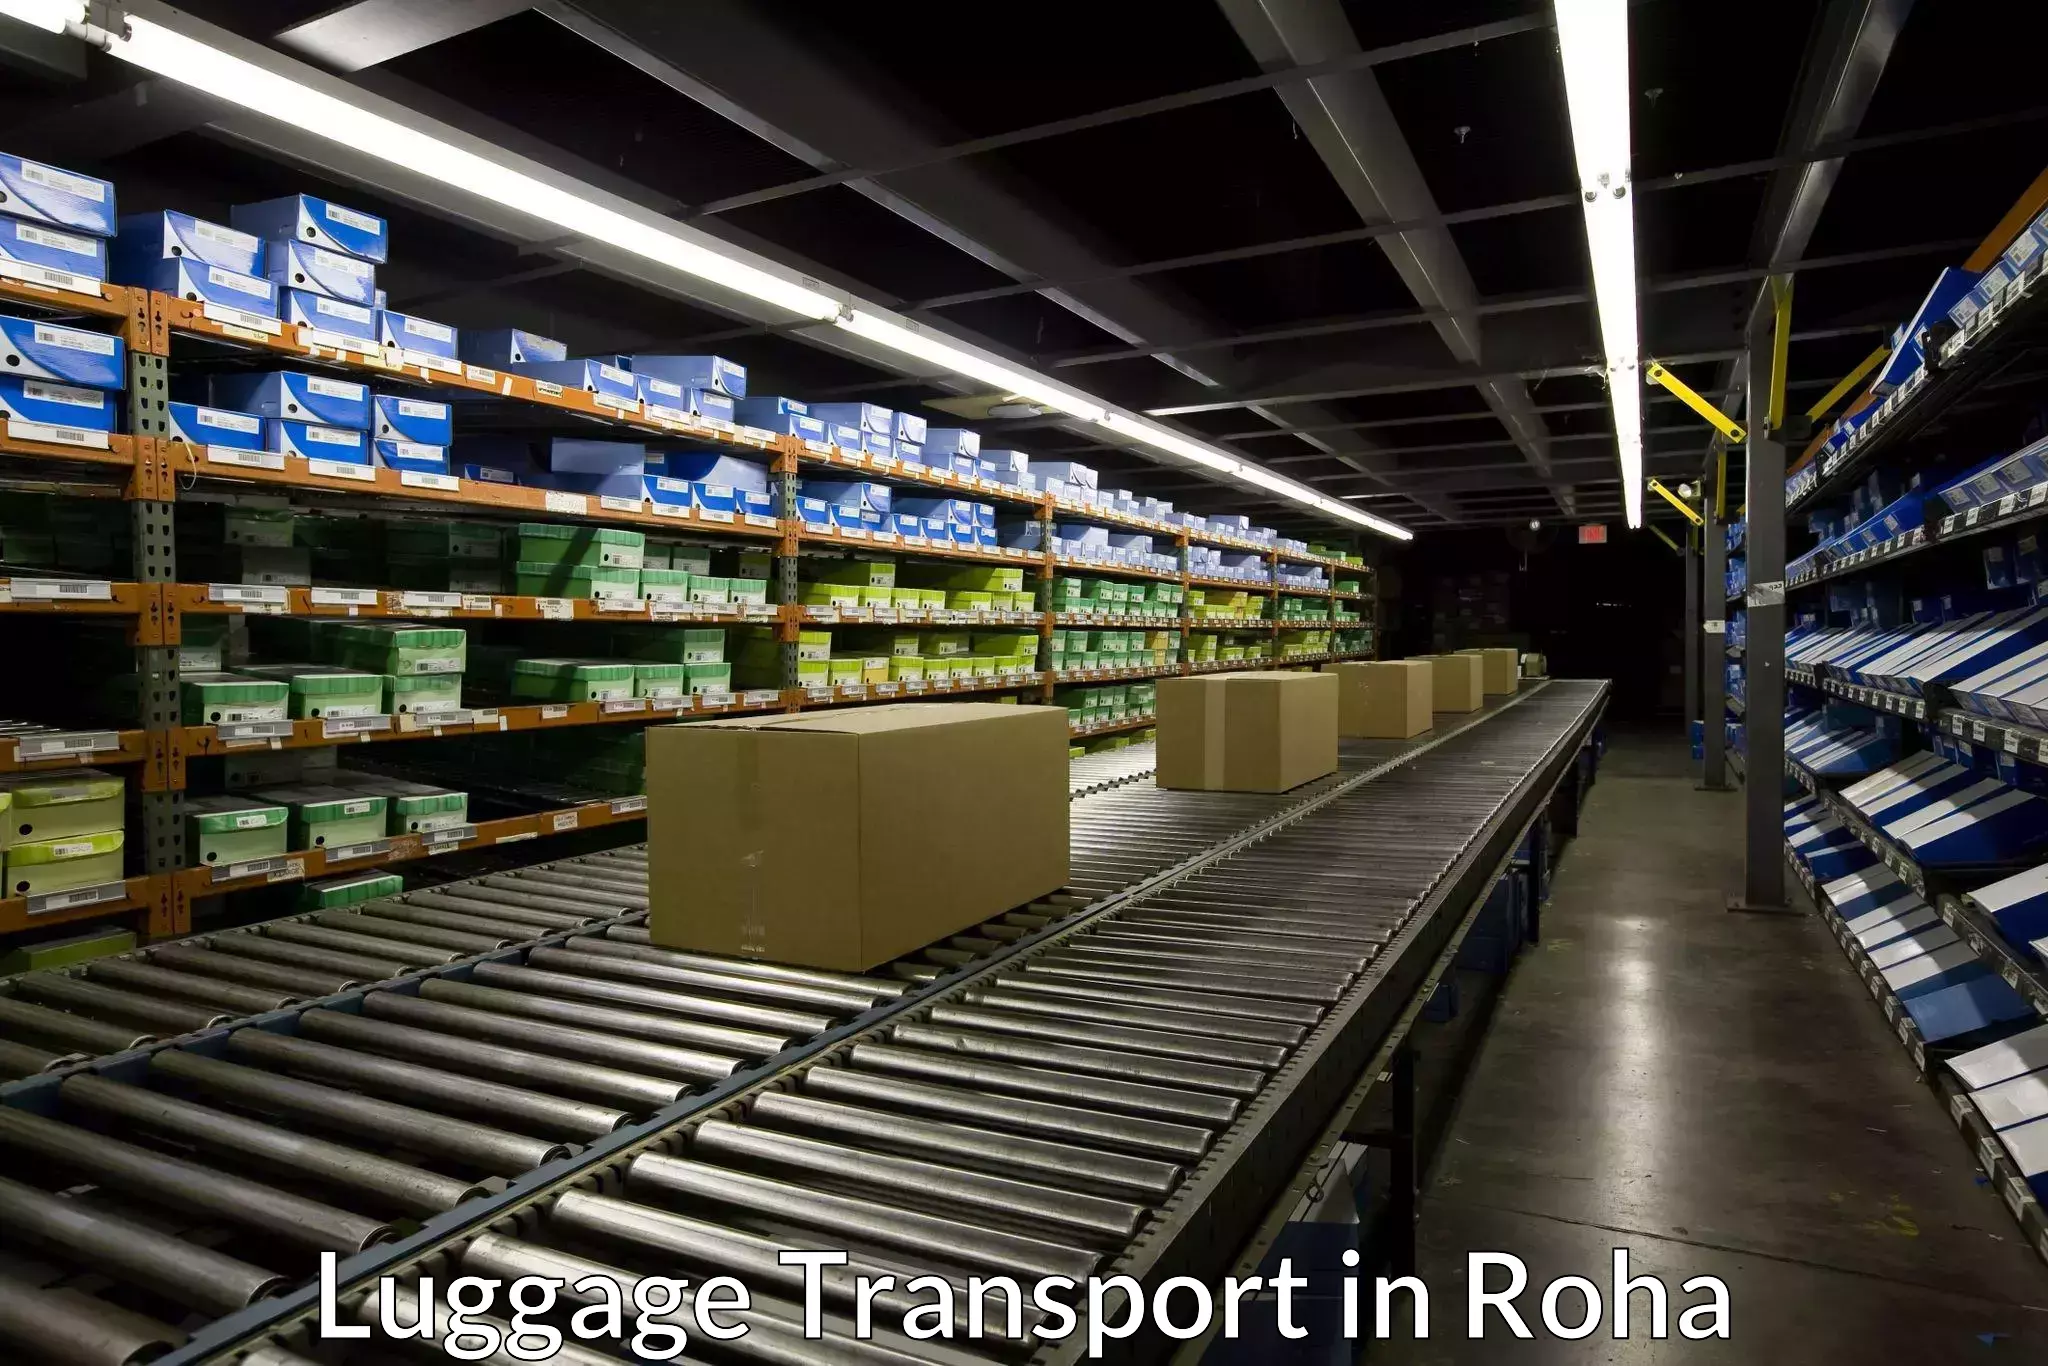 Baggage transport management in Roha